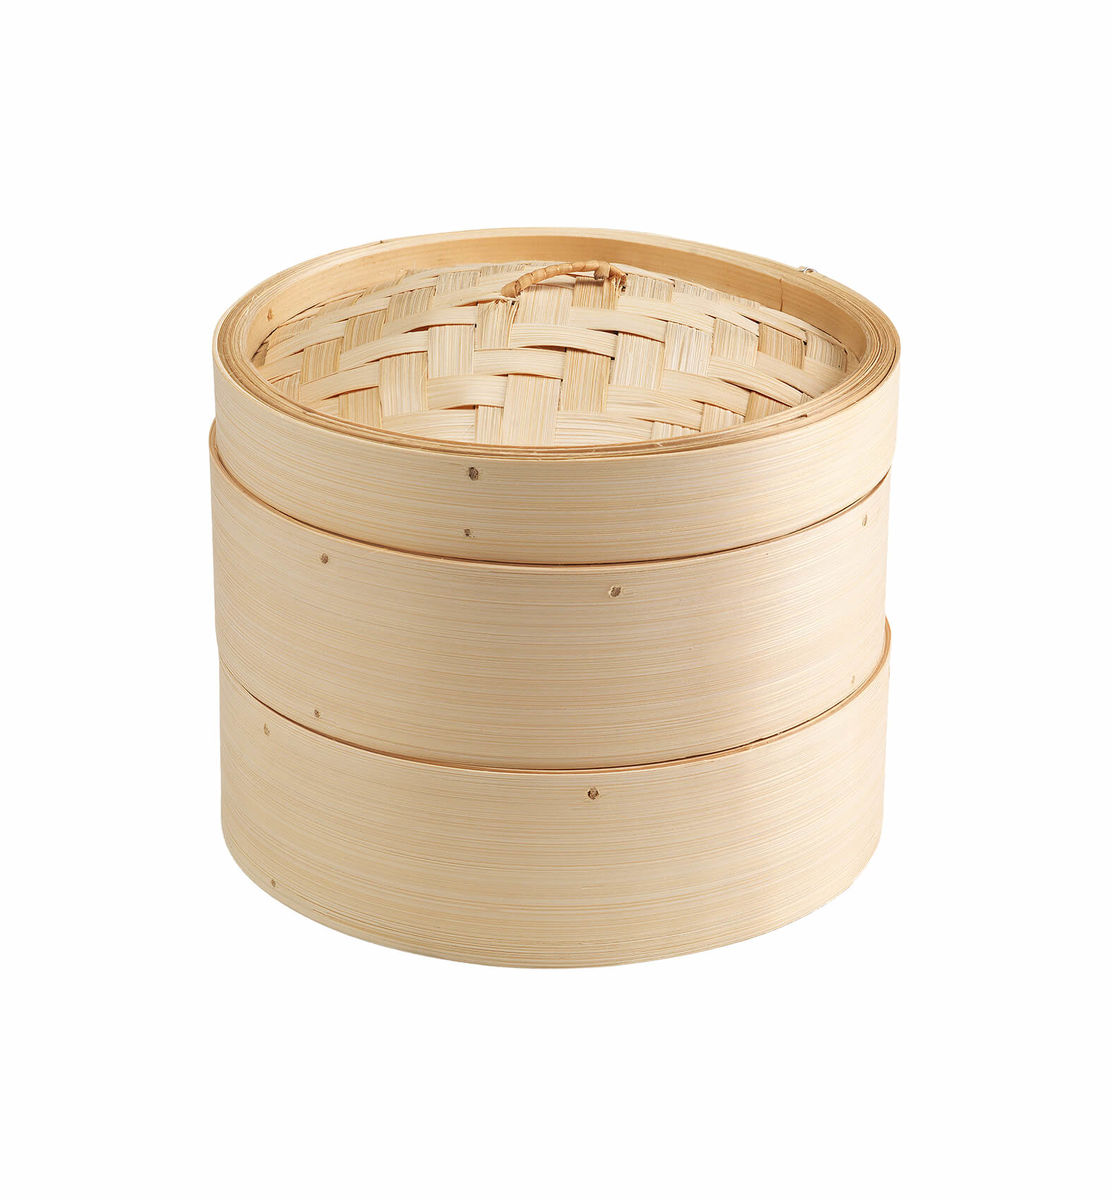 Image of Ken Hom Excellence Bambus Dampfgarer 20 cm bei nettoshop.ch